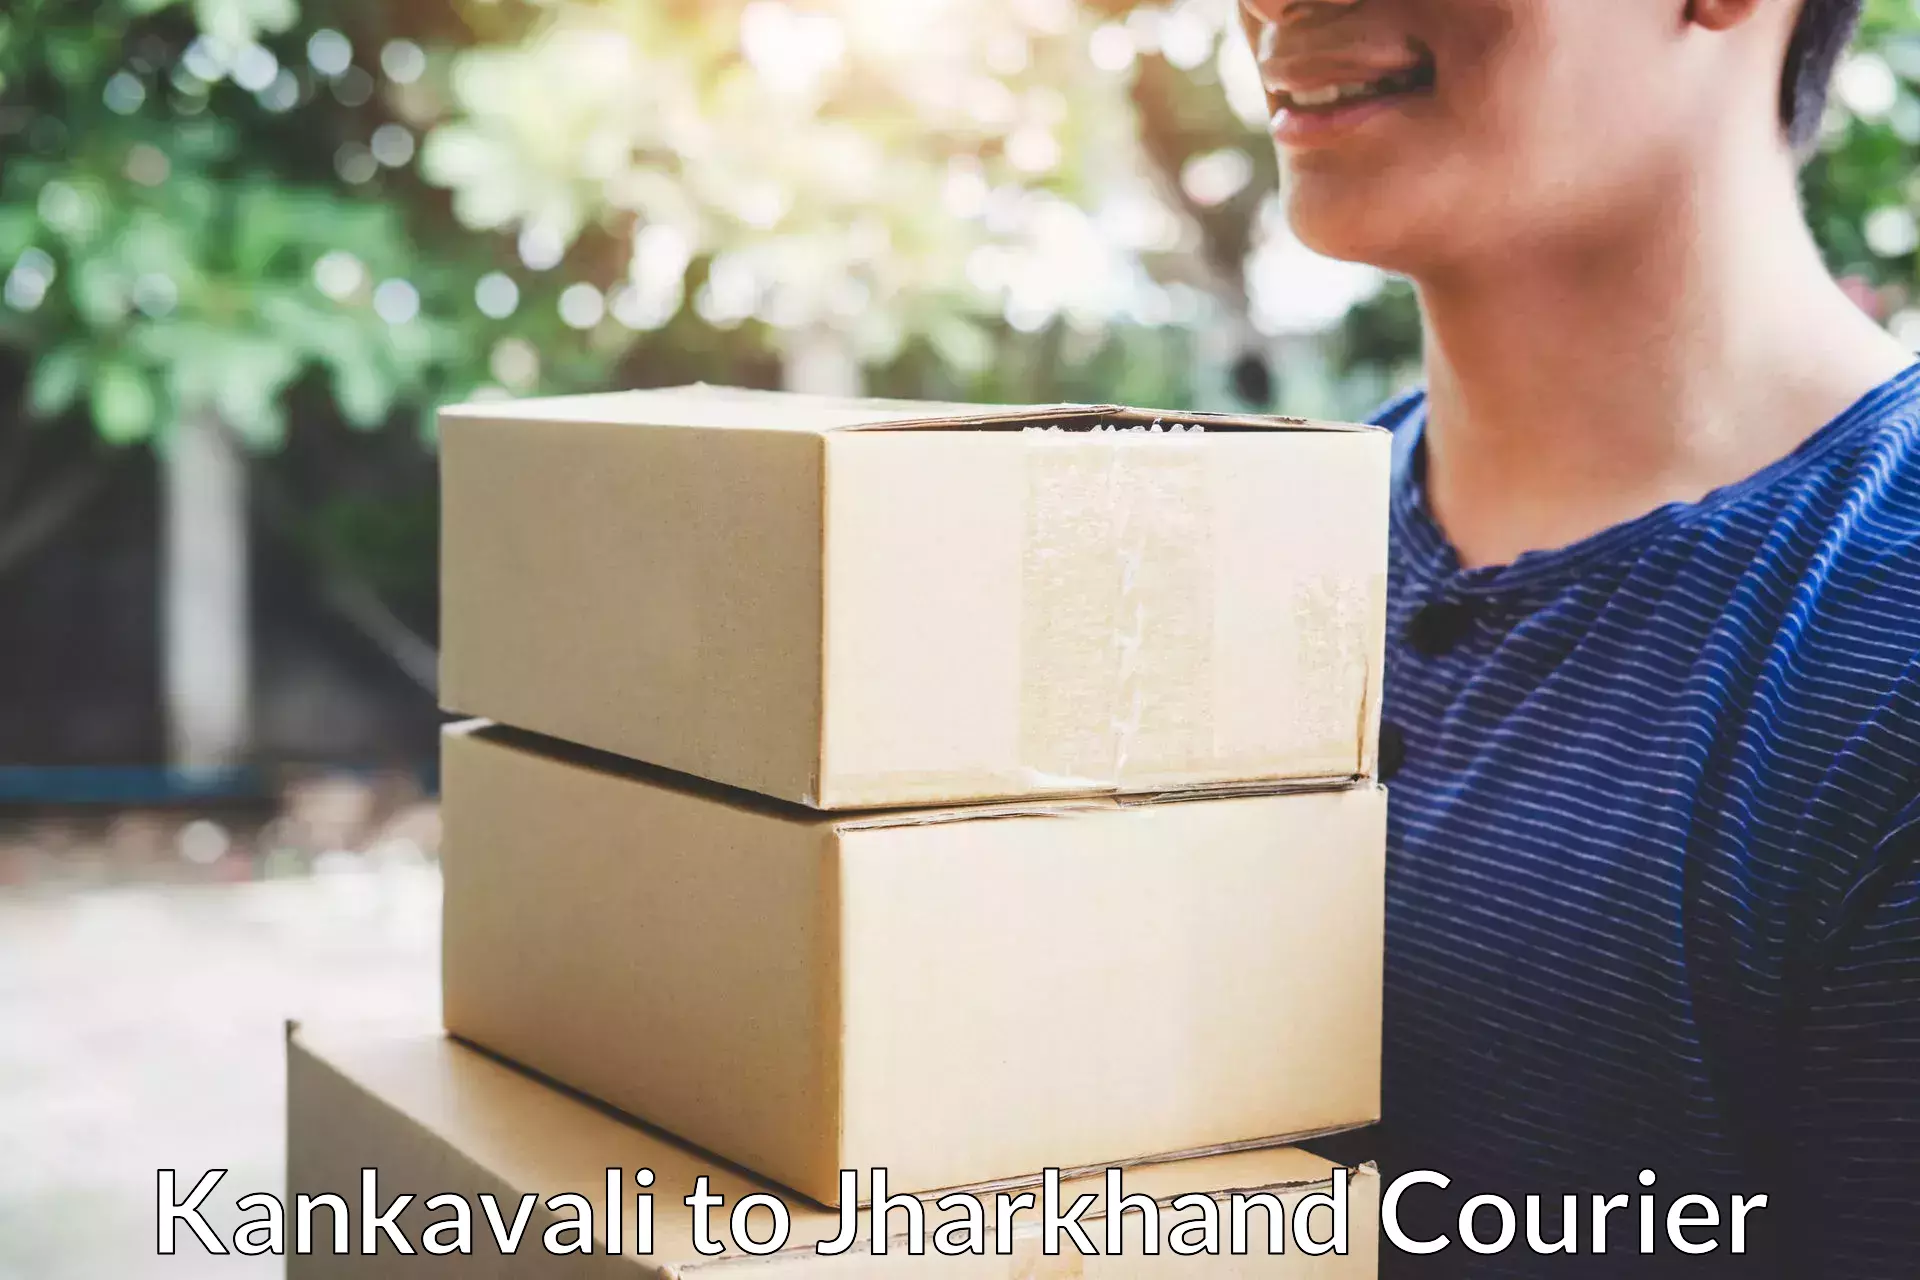 Comprehensive relocation services Kankavali to Jharkhand